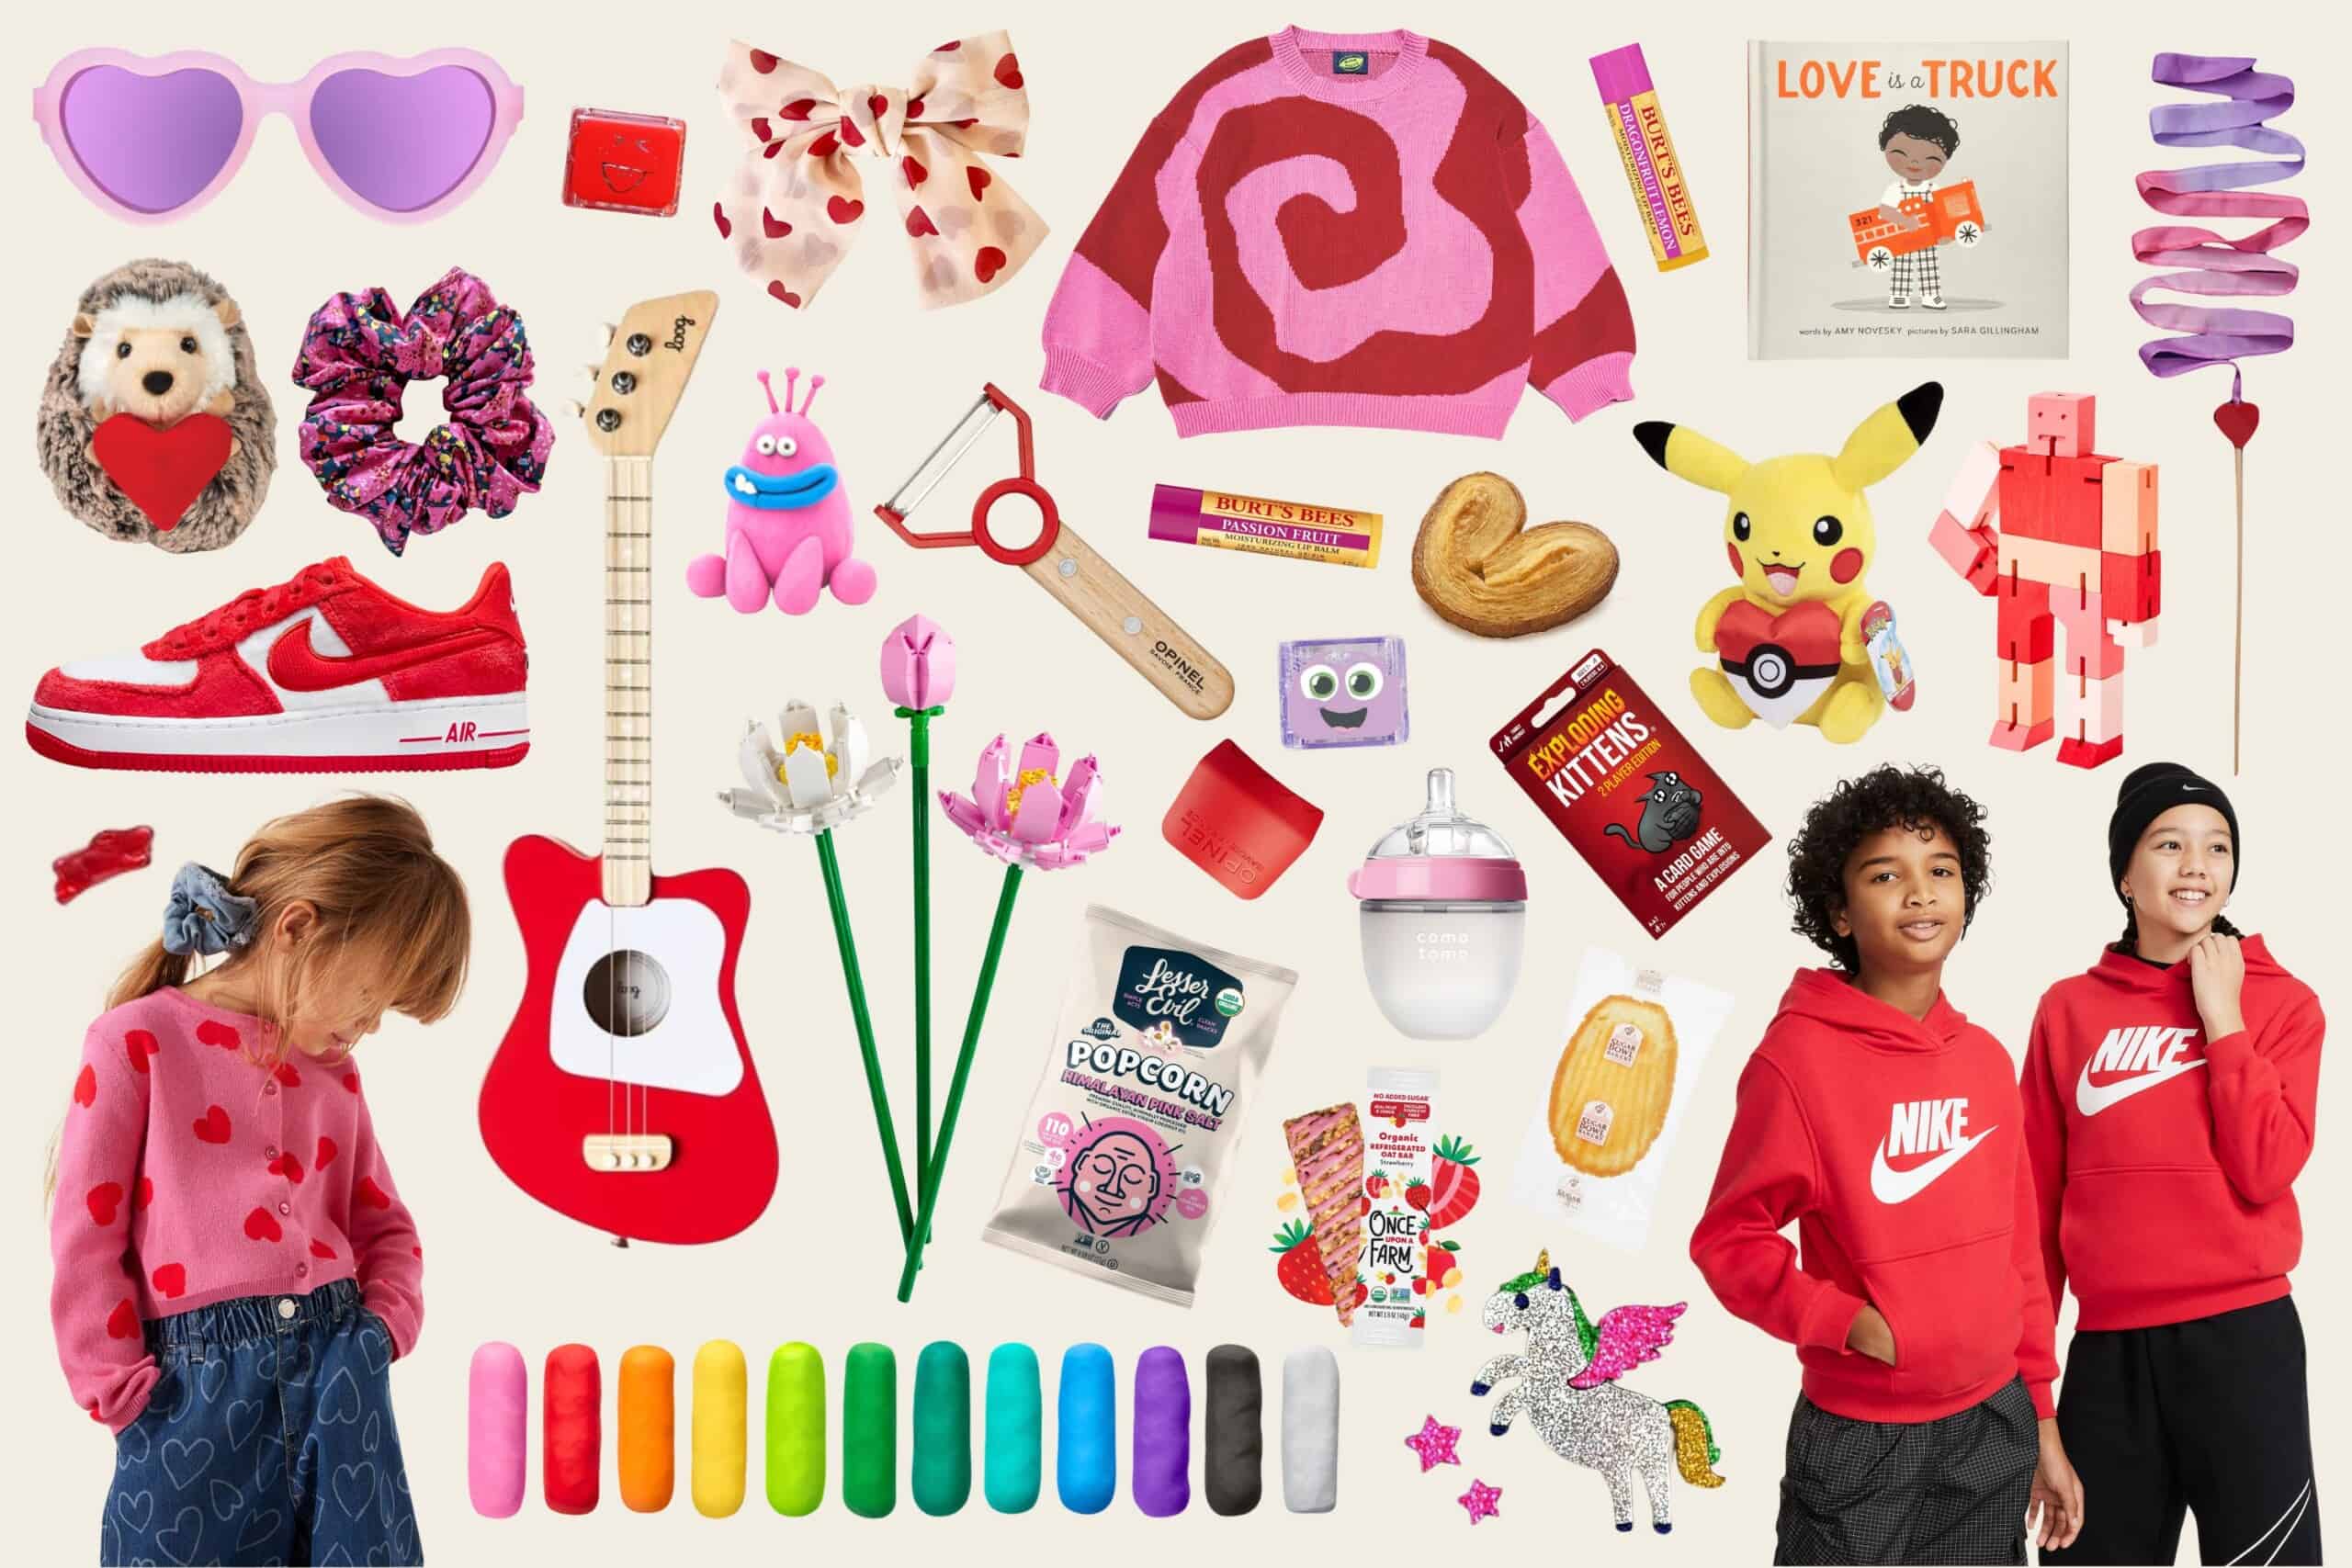 Valentine's Day Gifts For Kids